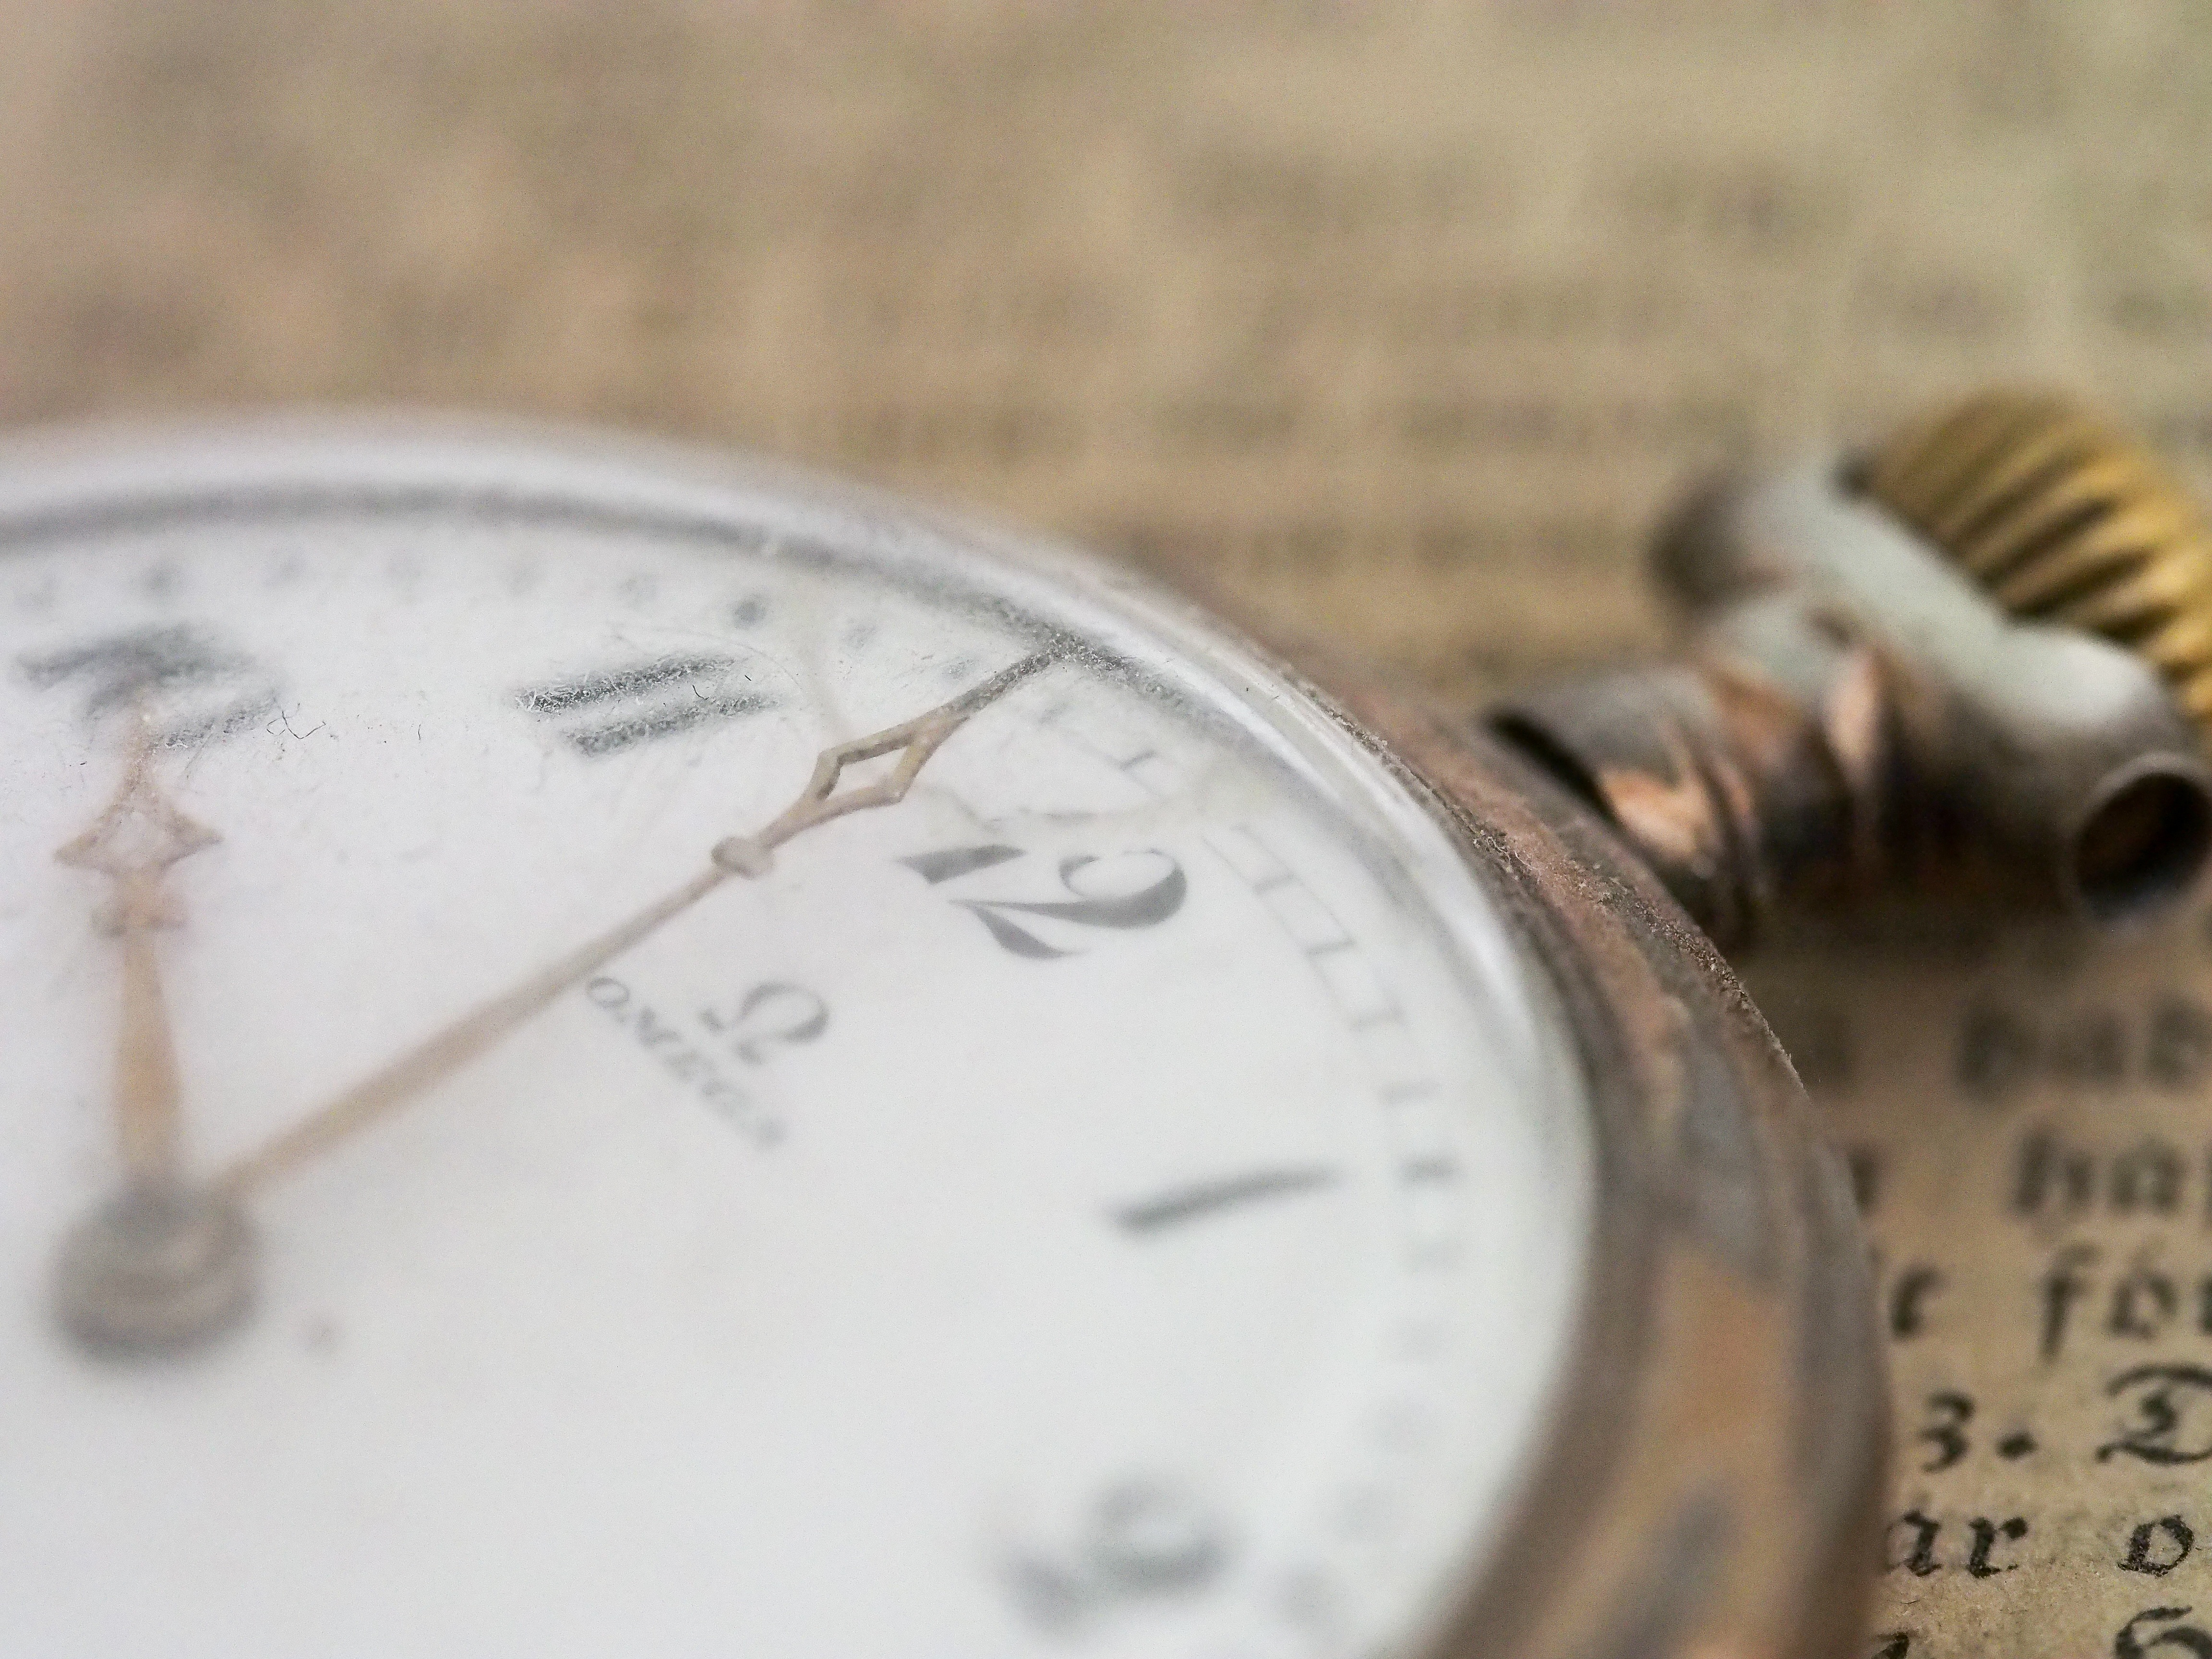 iPhone background miscellanea, pocket watch, dial, miscellaneous